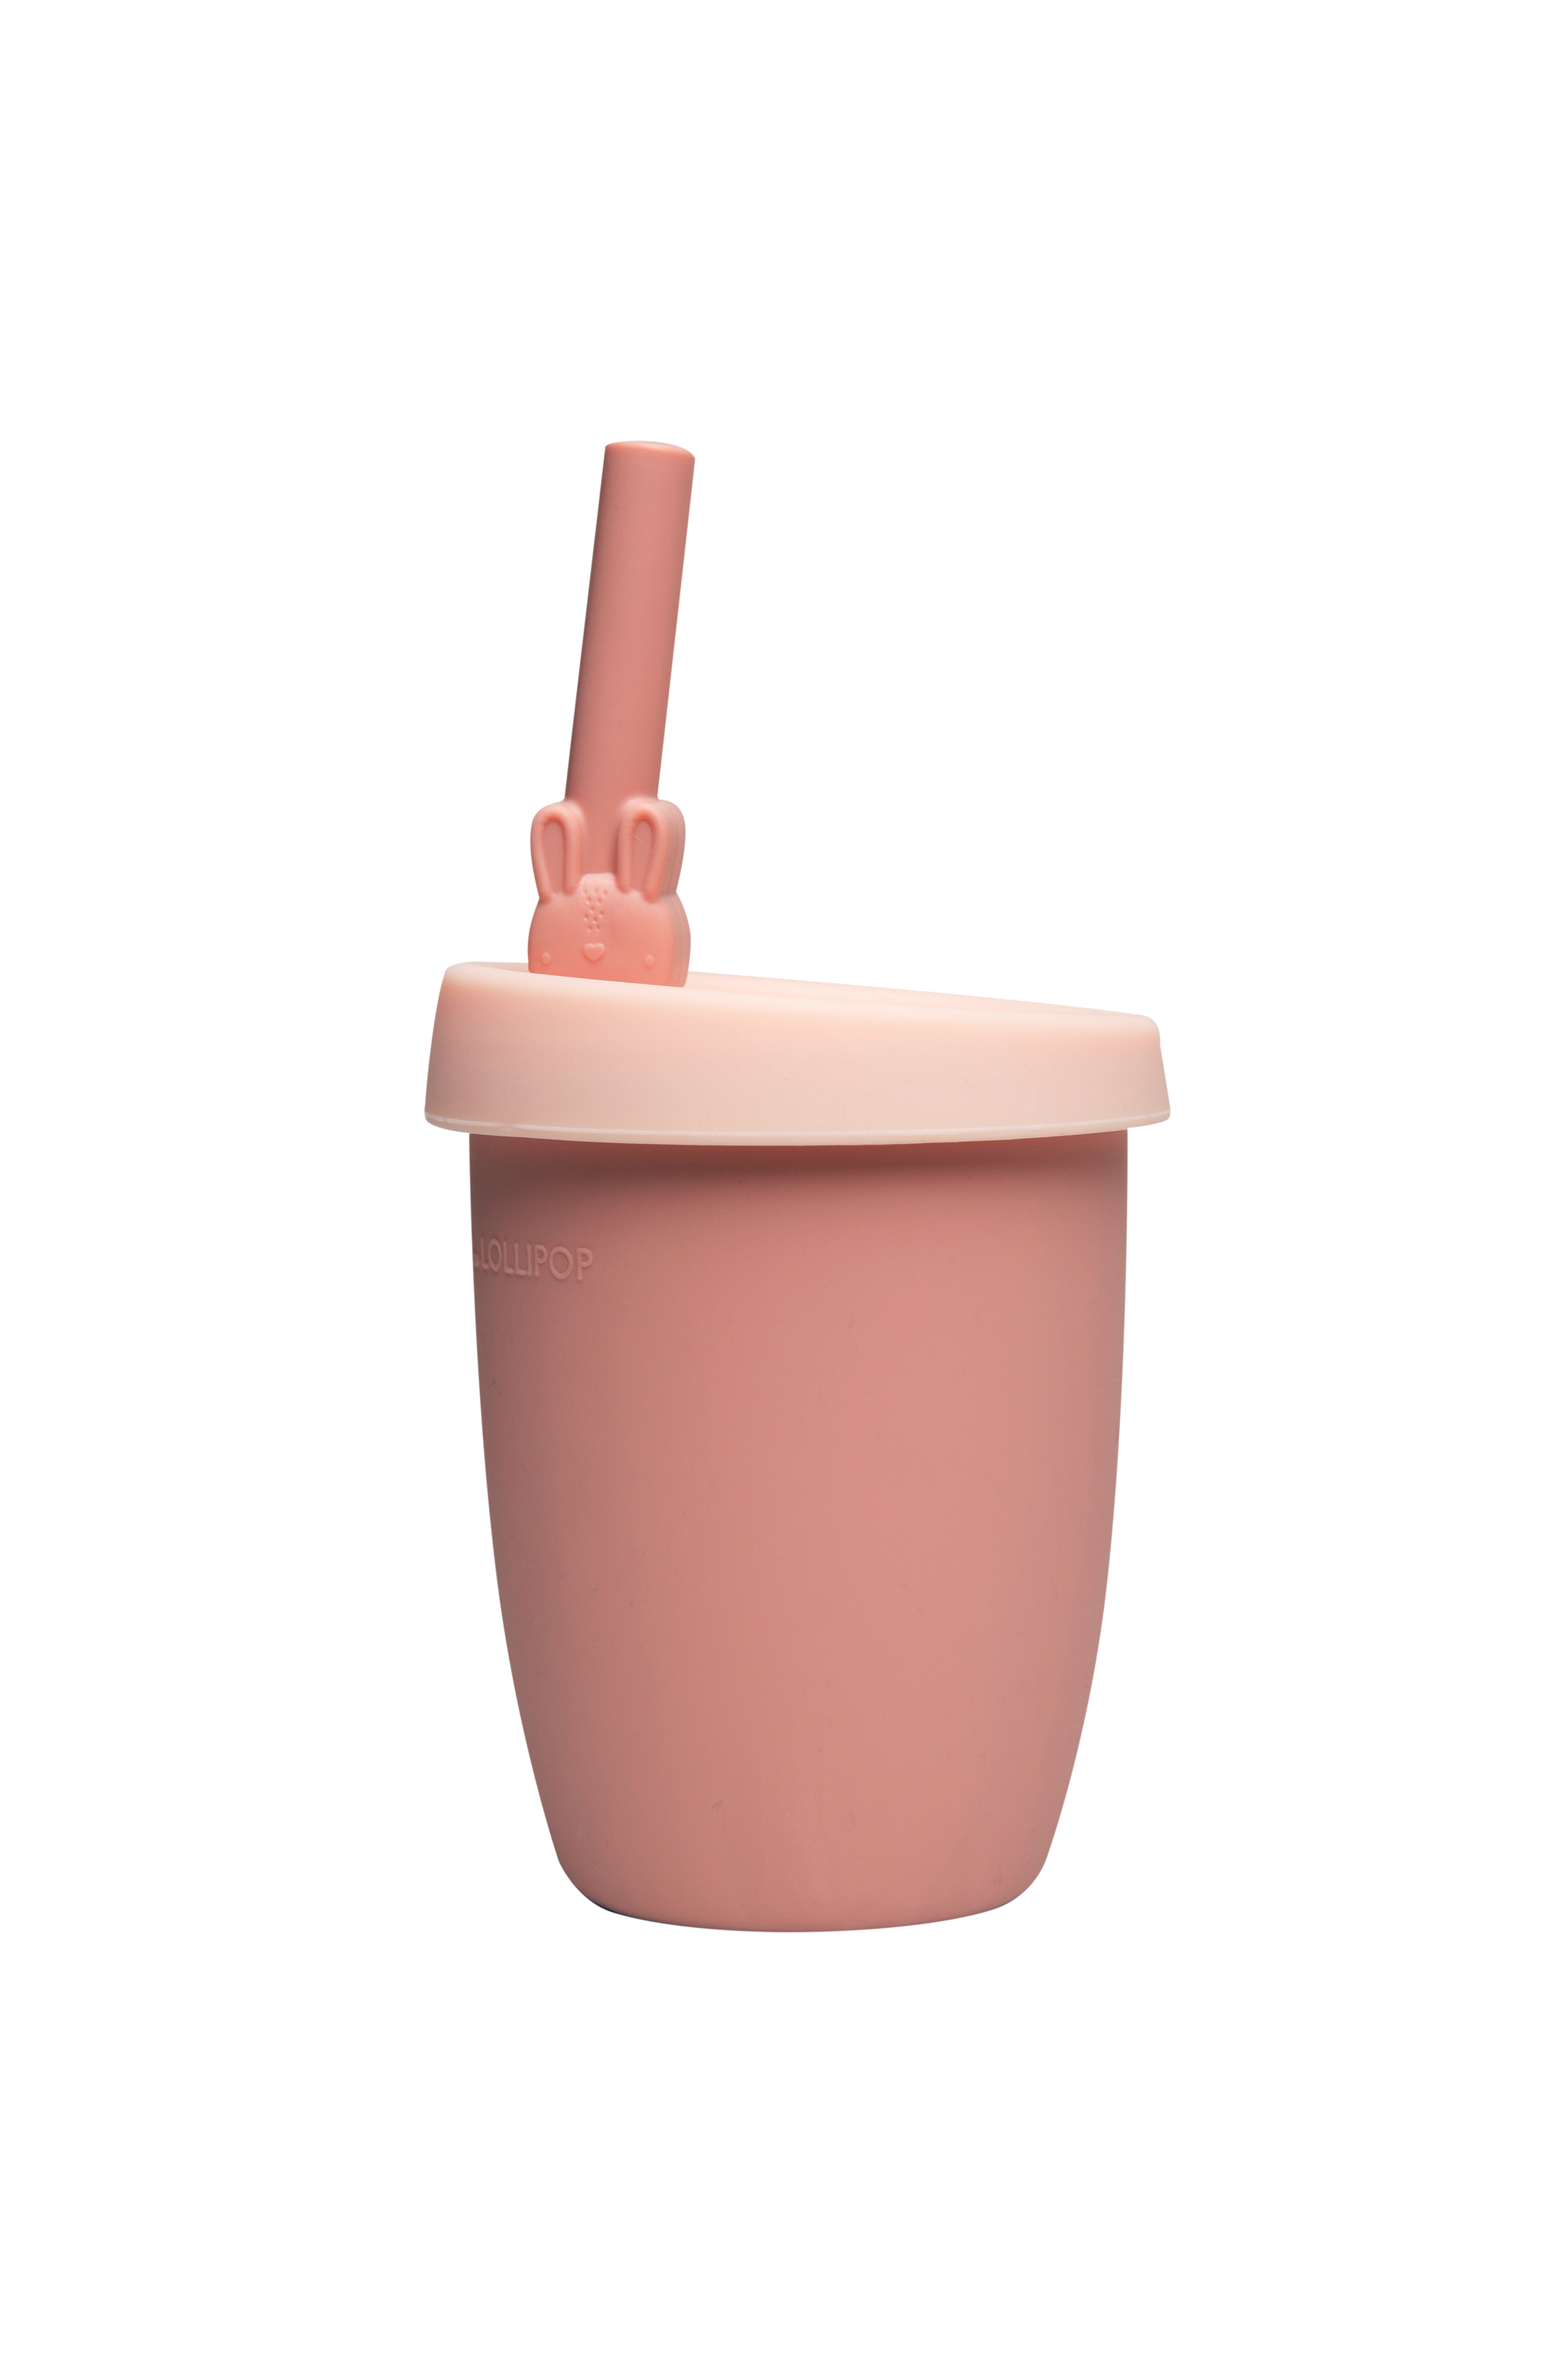 Silicone Cup with Lid + Straw, Sand by Bugandbeankids